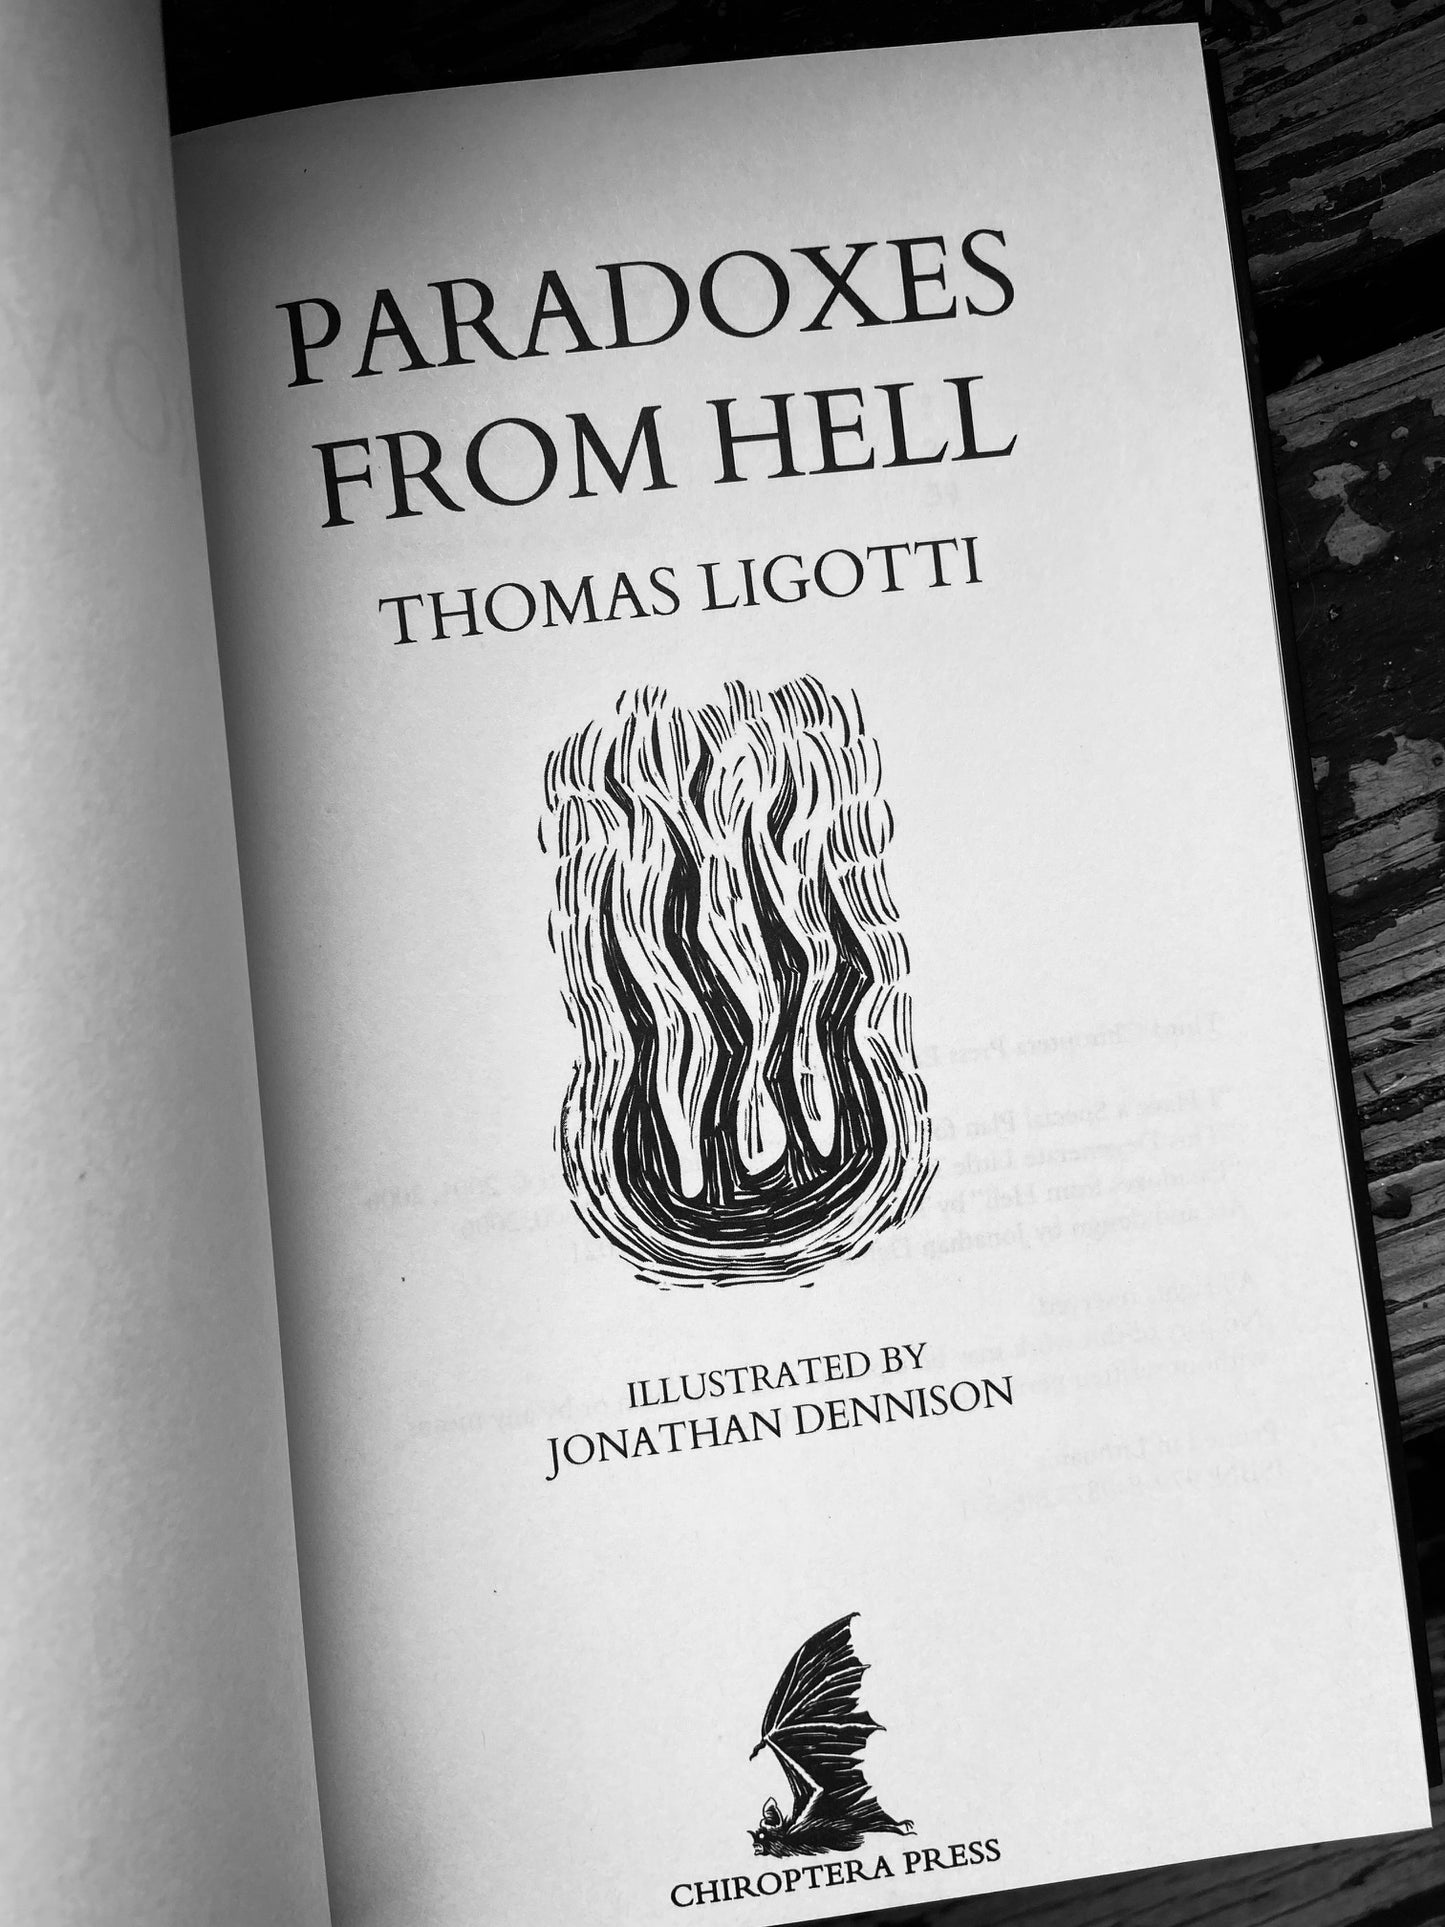 Paradoxes from Hell by Thomas Ligotti